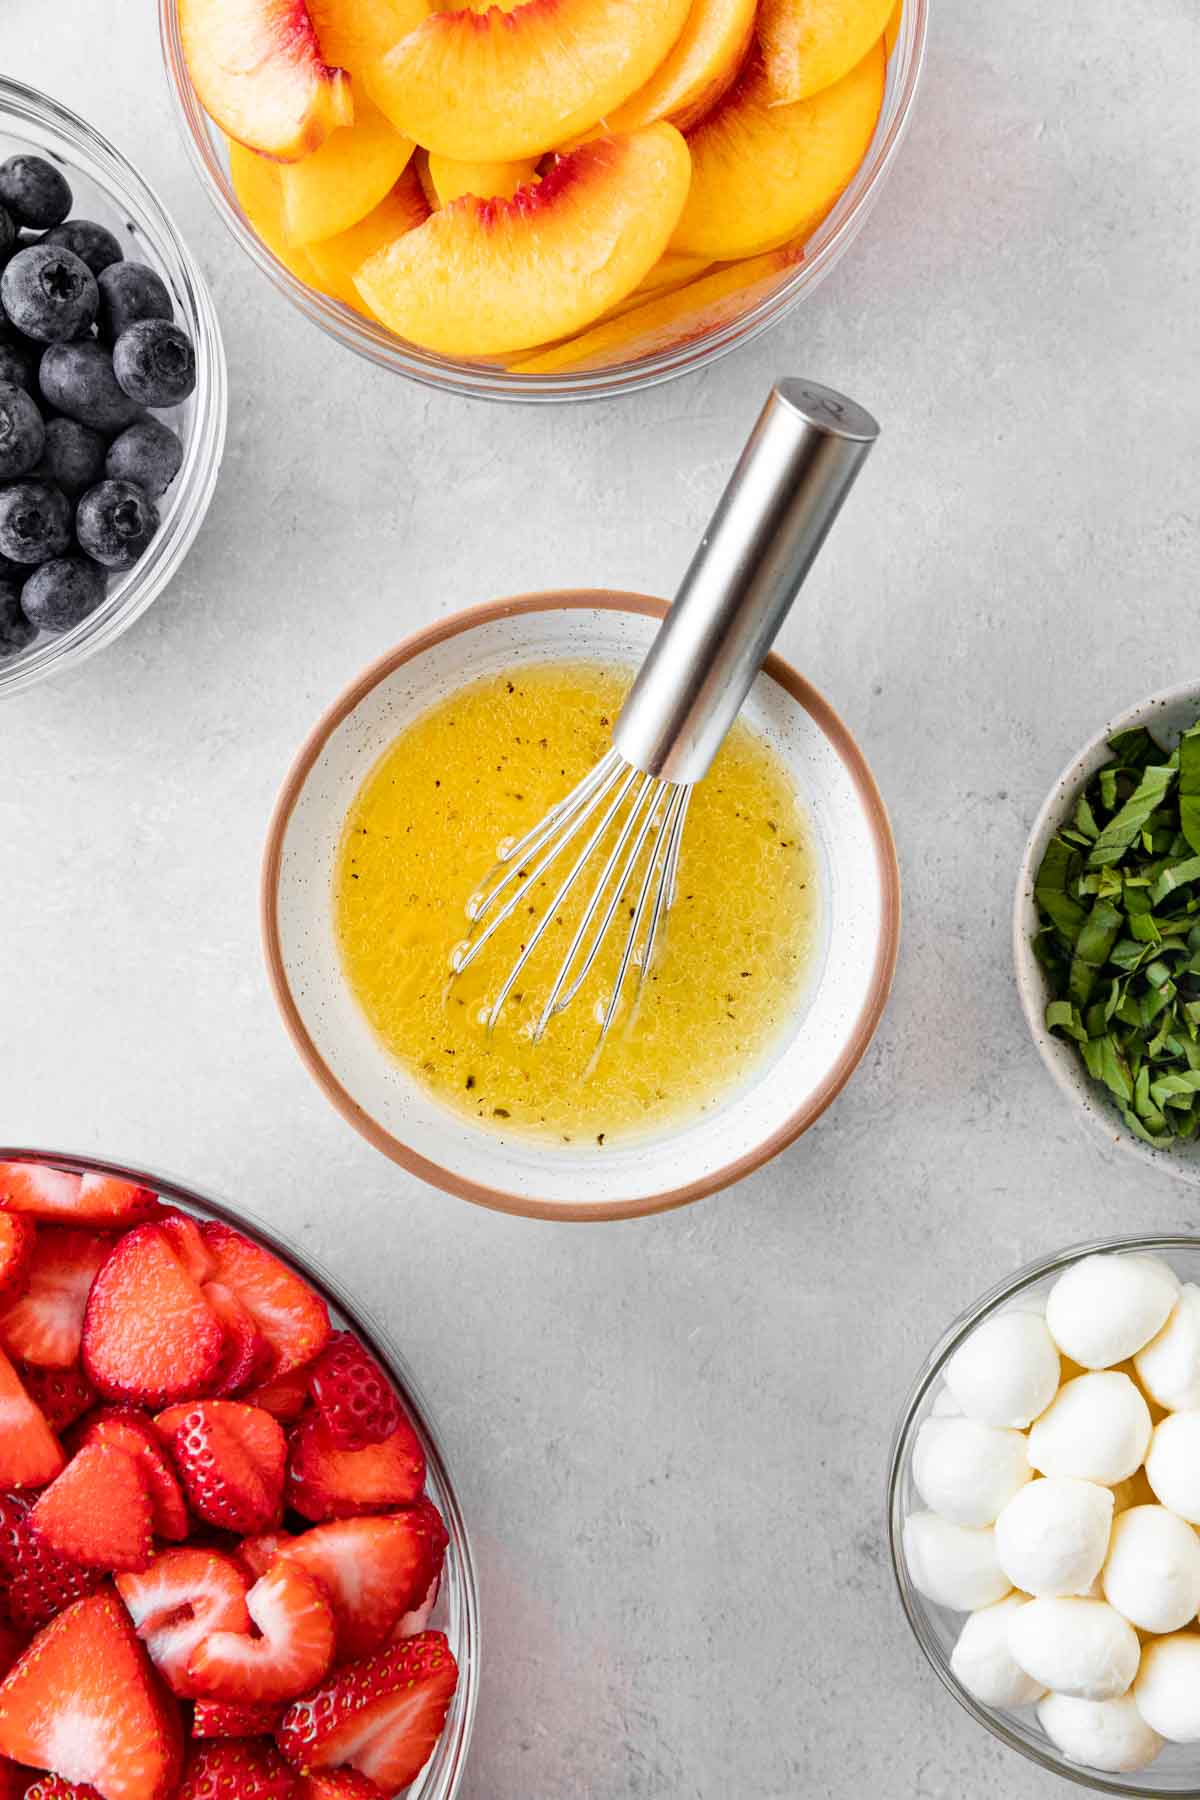 Peach Berry Caprese Salad dressing ingredients in mixing bowl